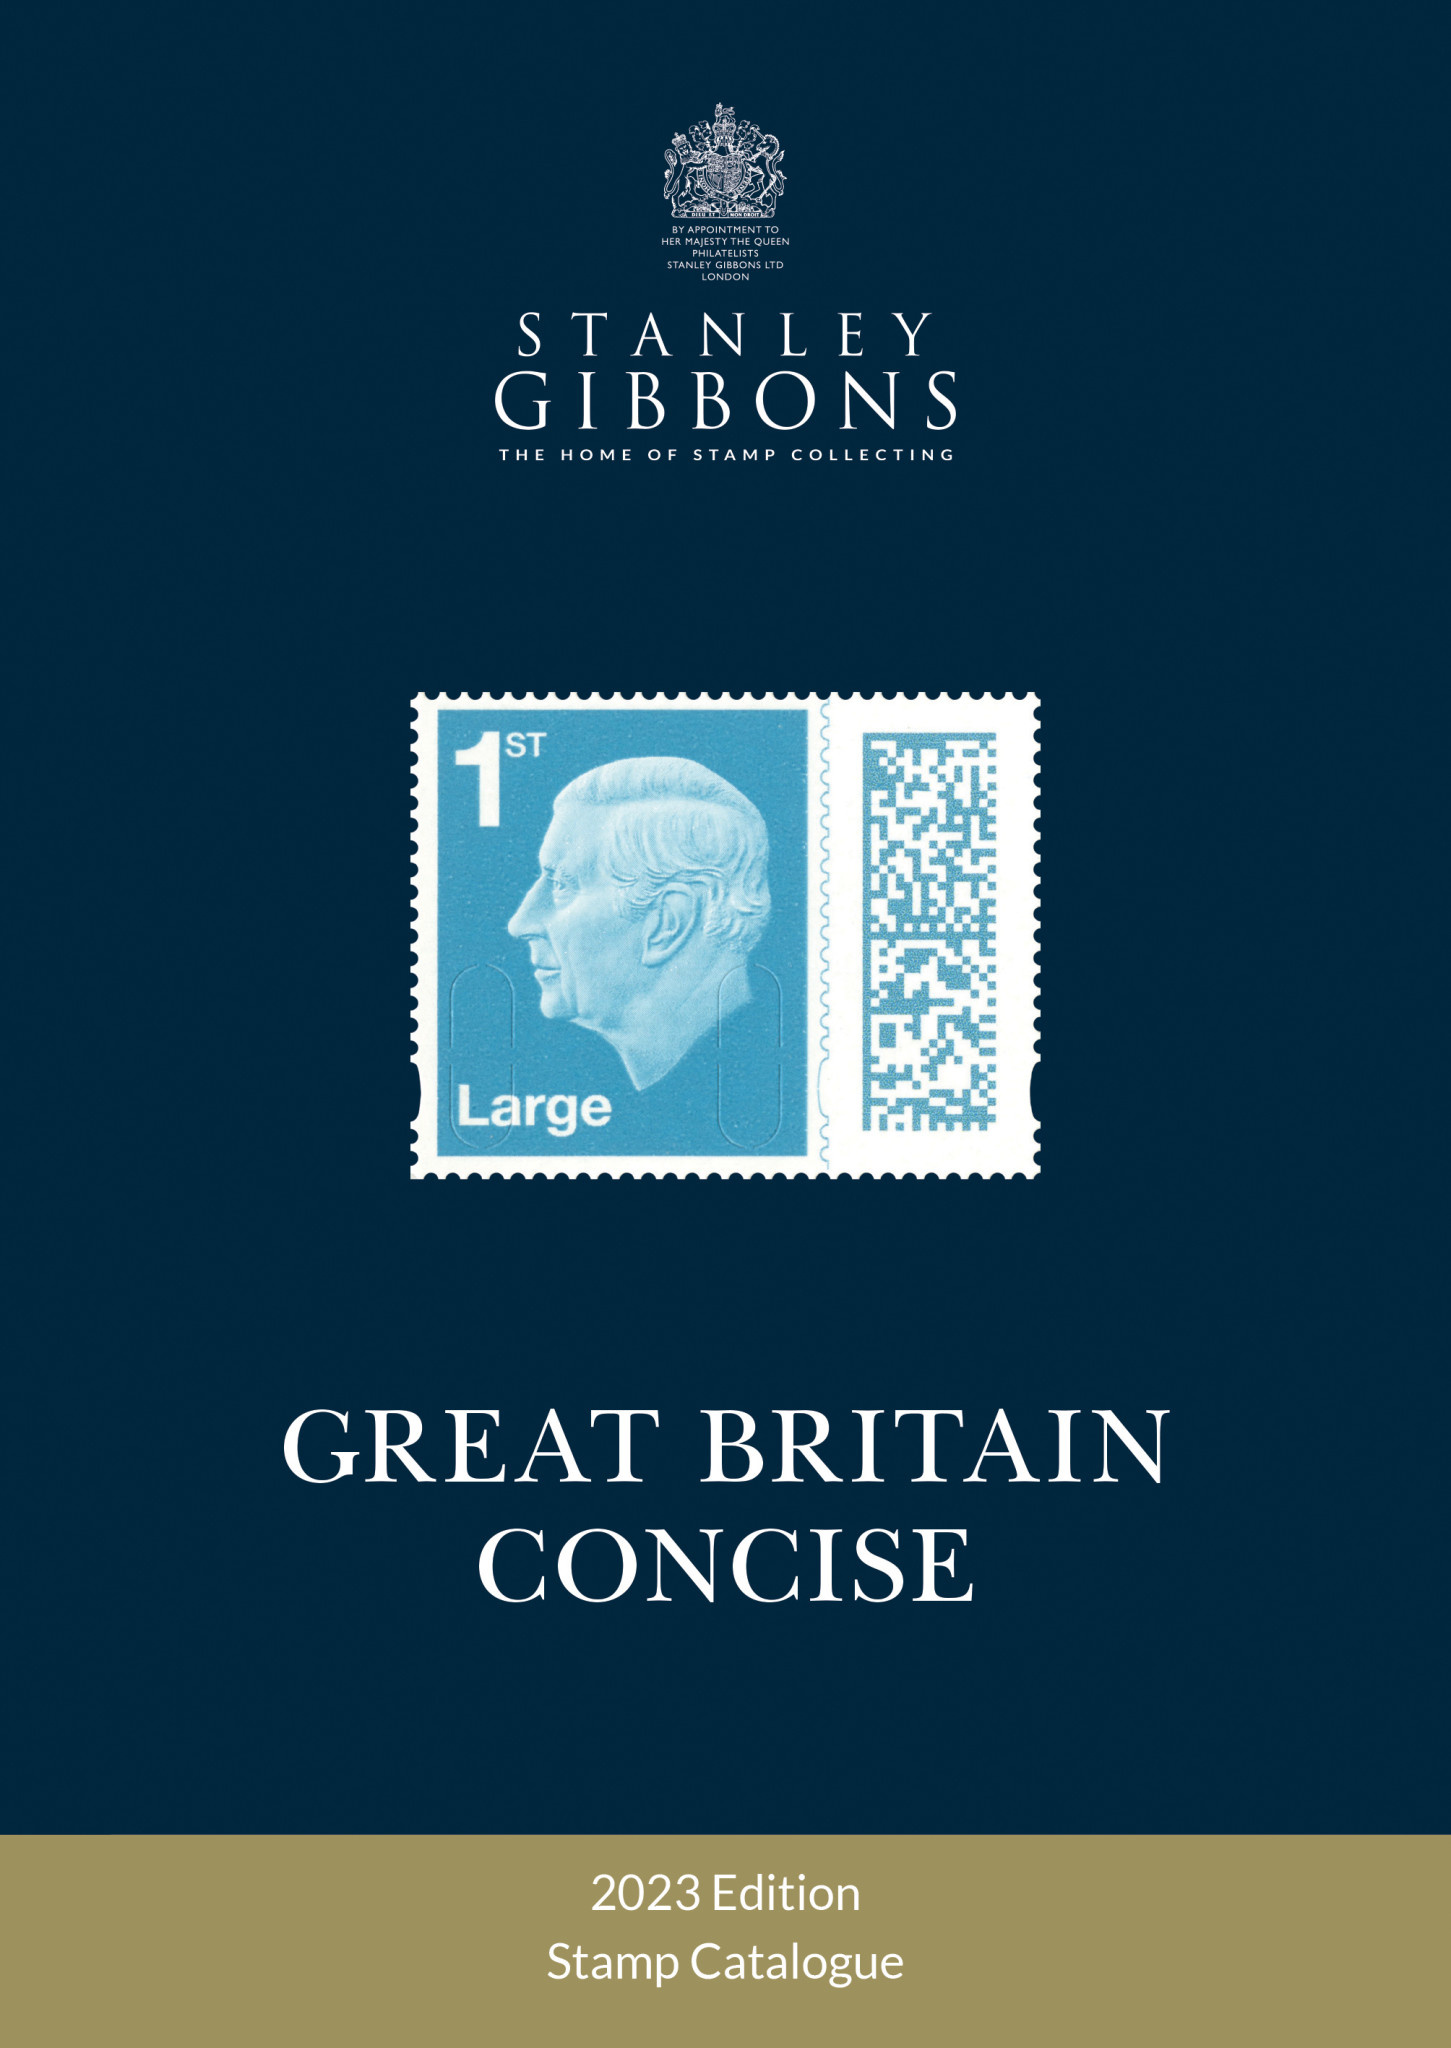 Gibbons Great Britain Concise Stamp Catalogue 2023 Edition collectura